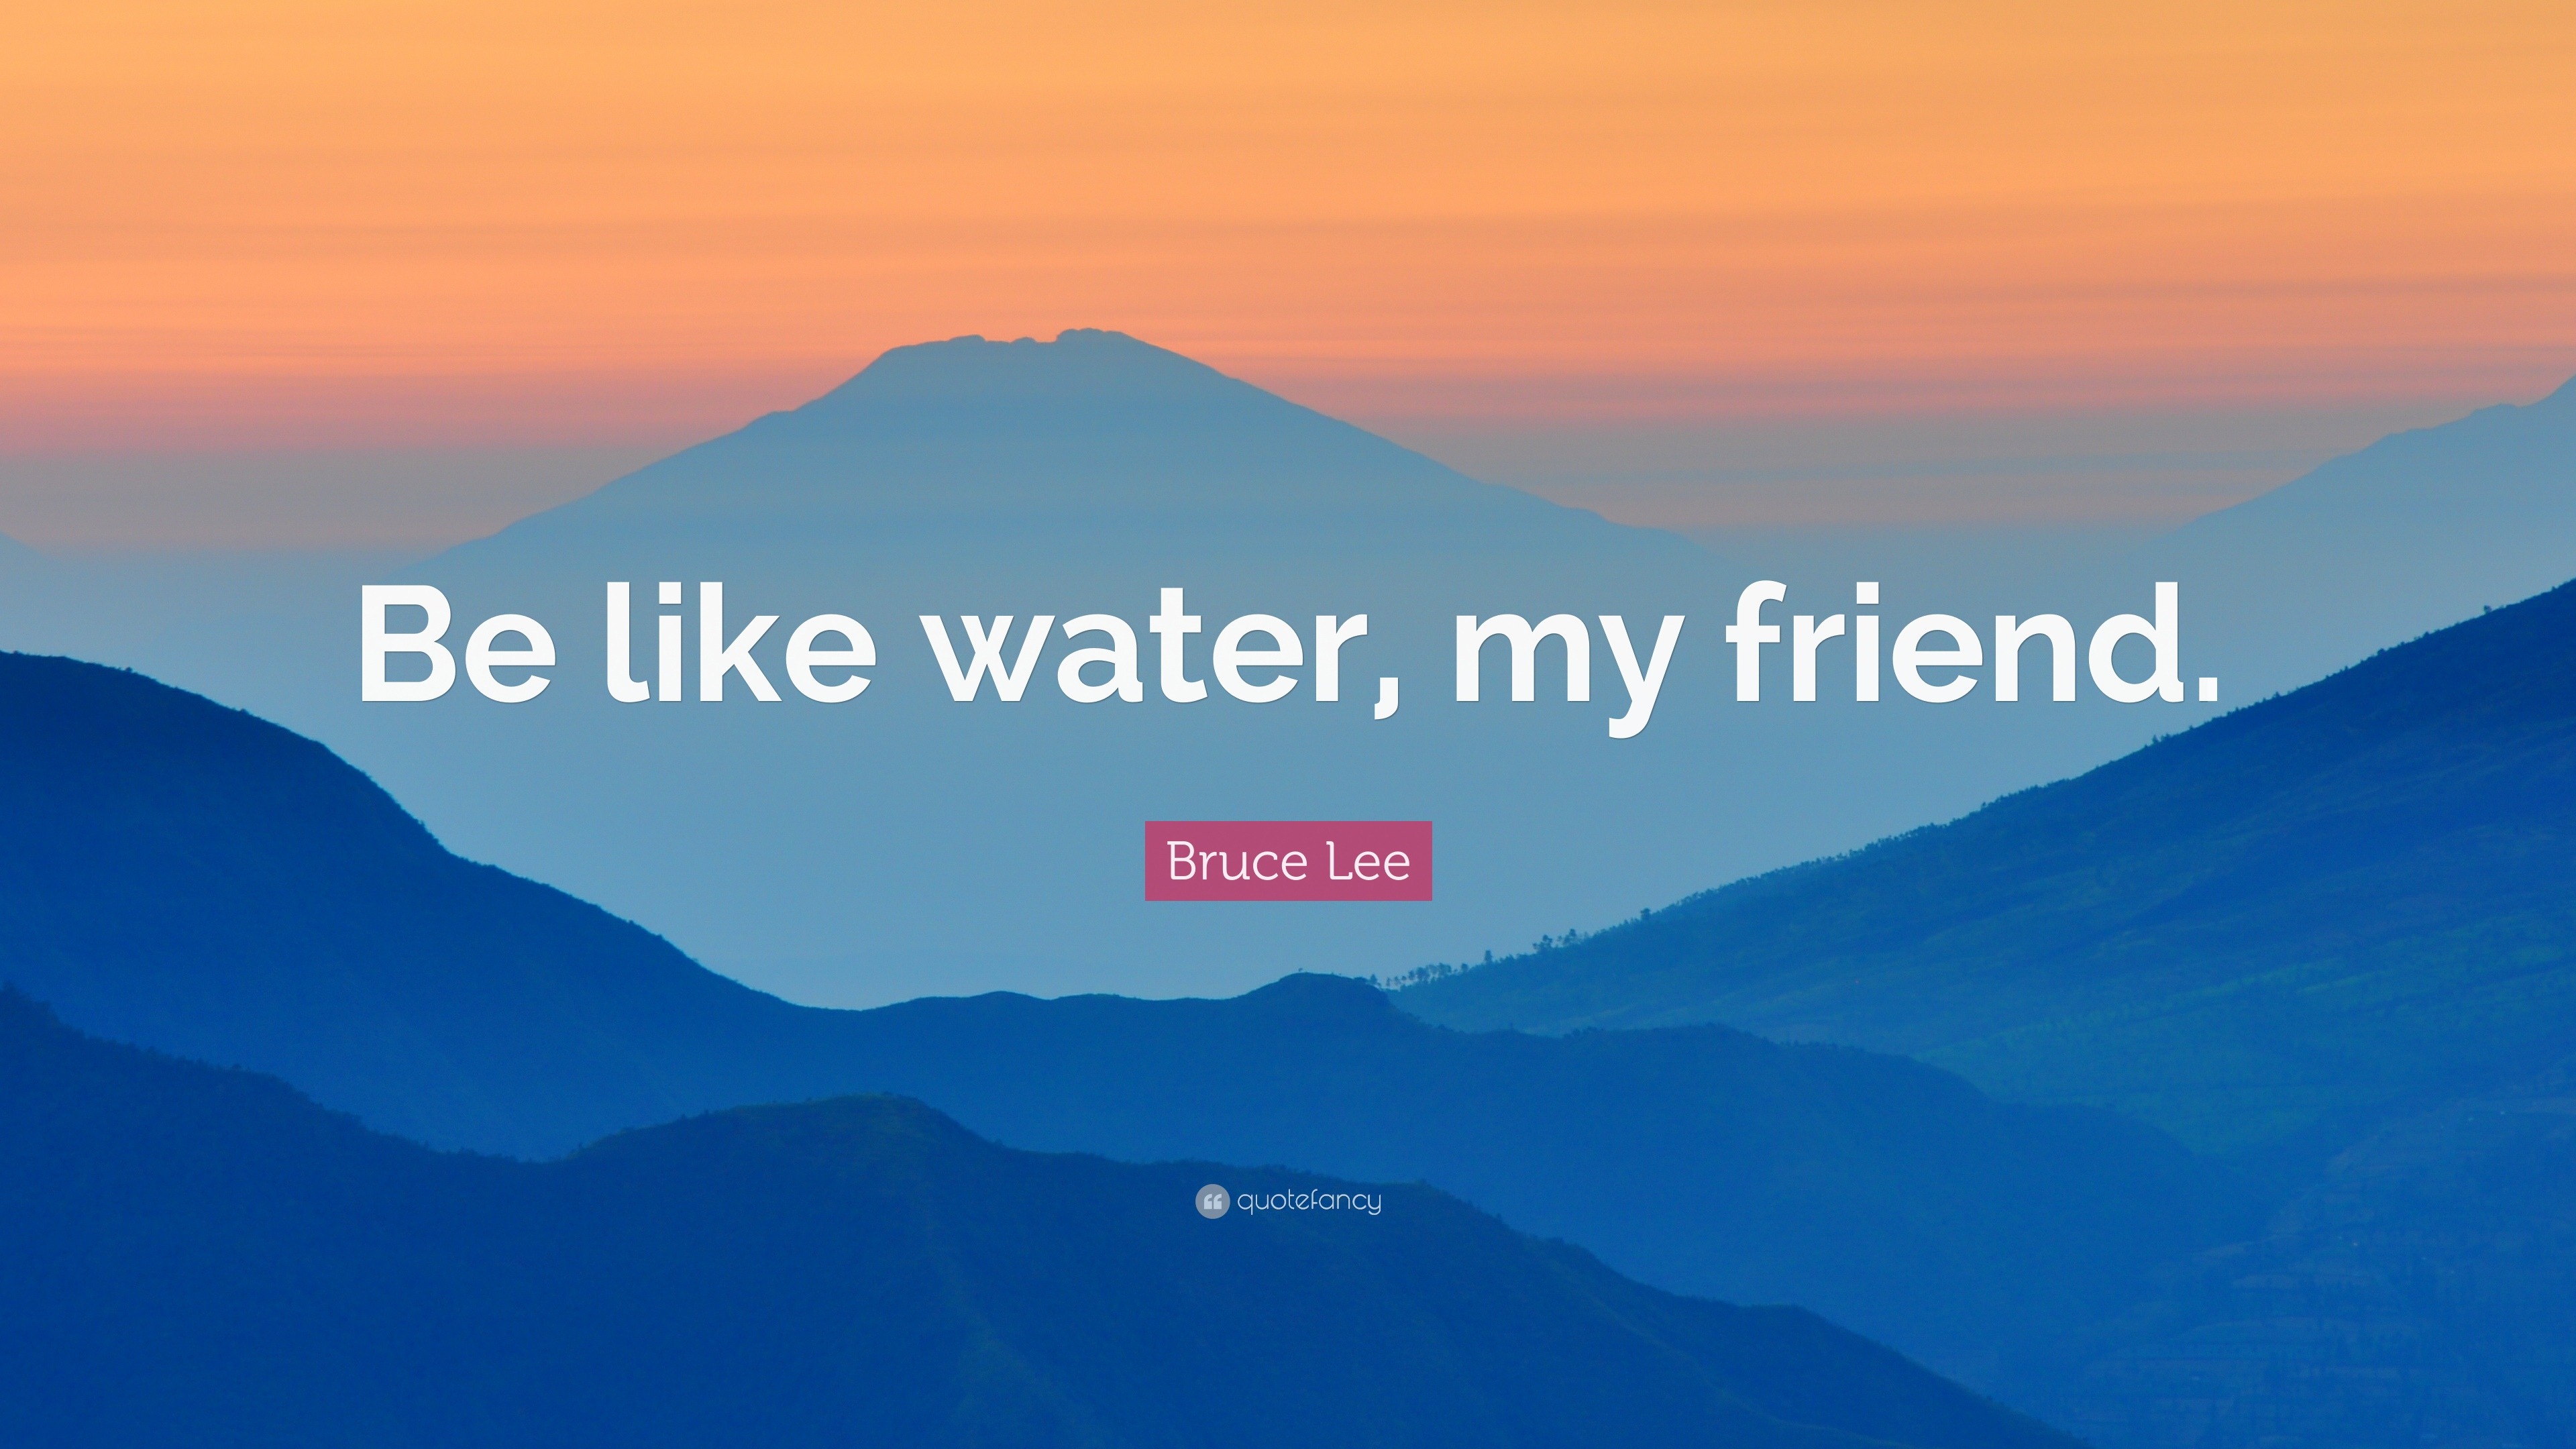 Bruce Lee Quote: “Be like water, my friend.” (12 wallpapers) - Quotefancy